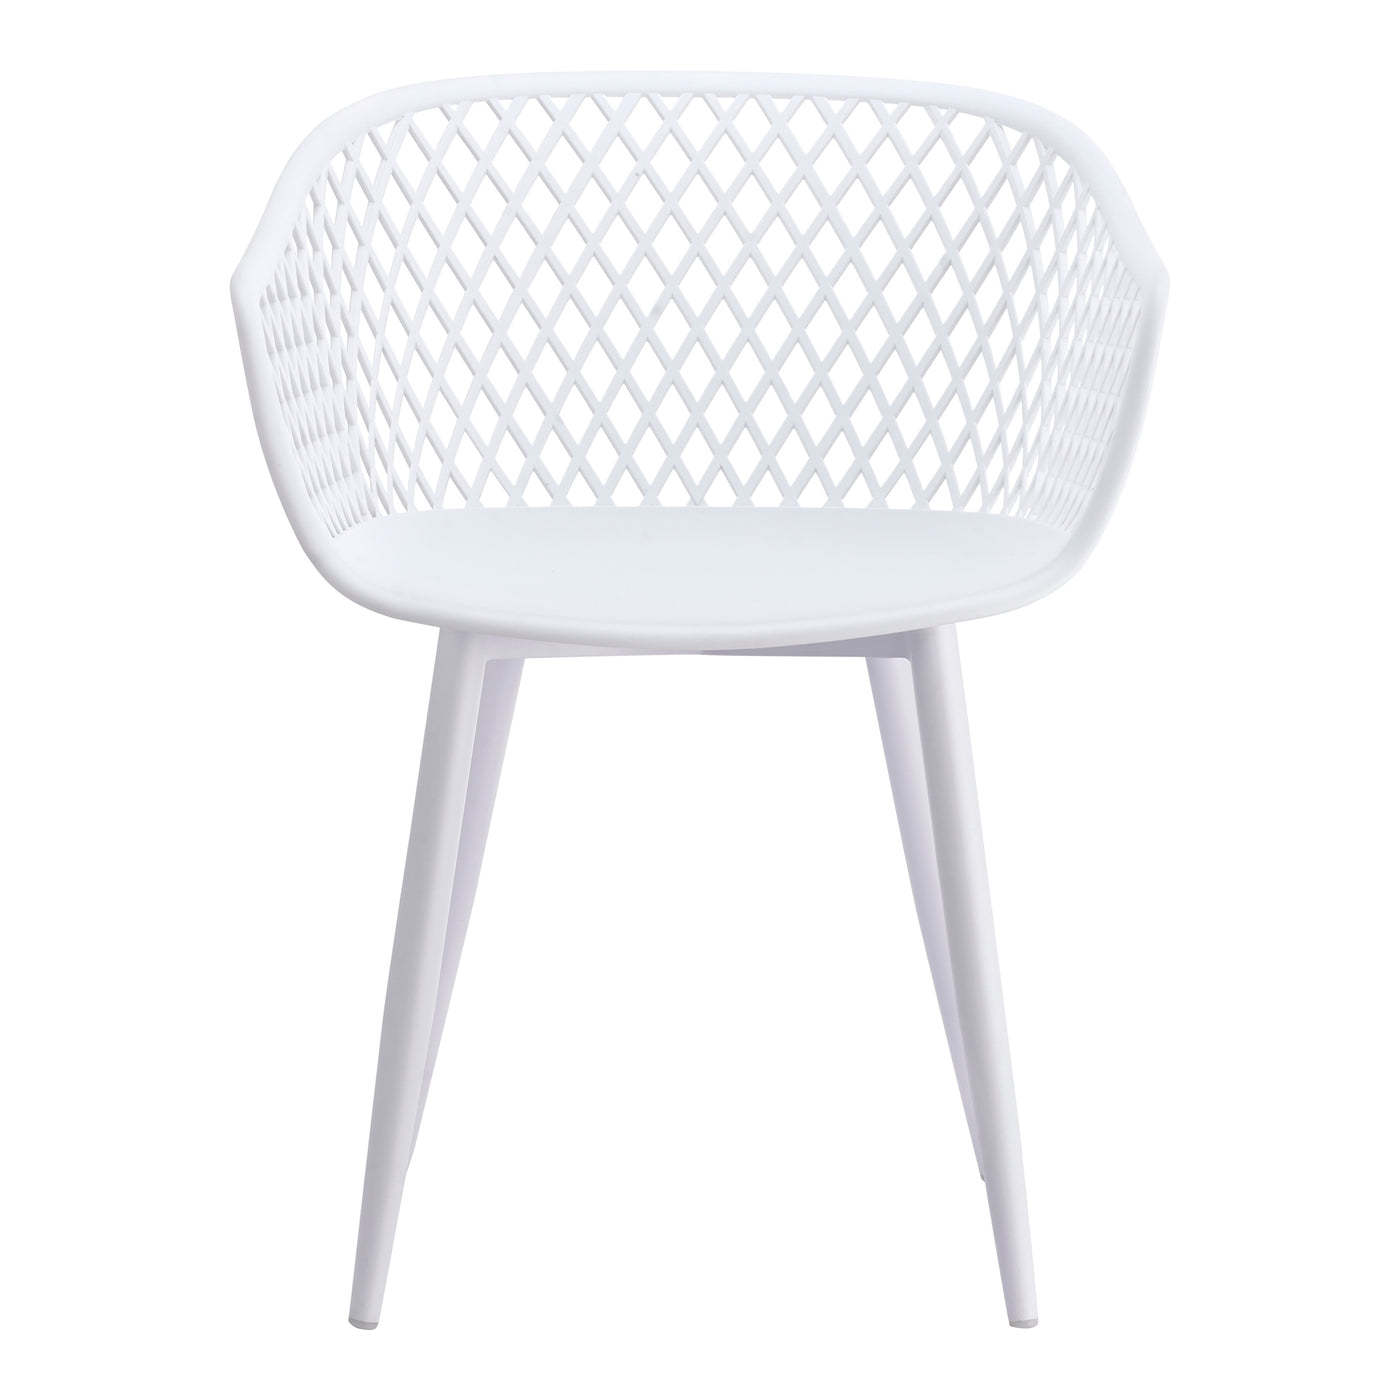 Take a seat in the stylish and comfortable Piazza Chair. Made with a durable polypropylene, this chair comes in several co...